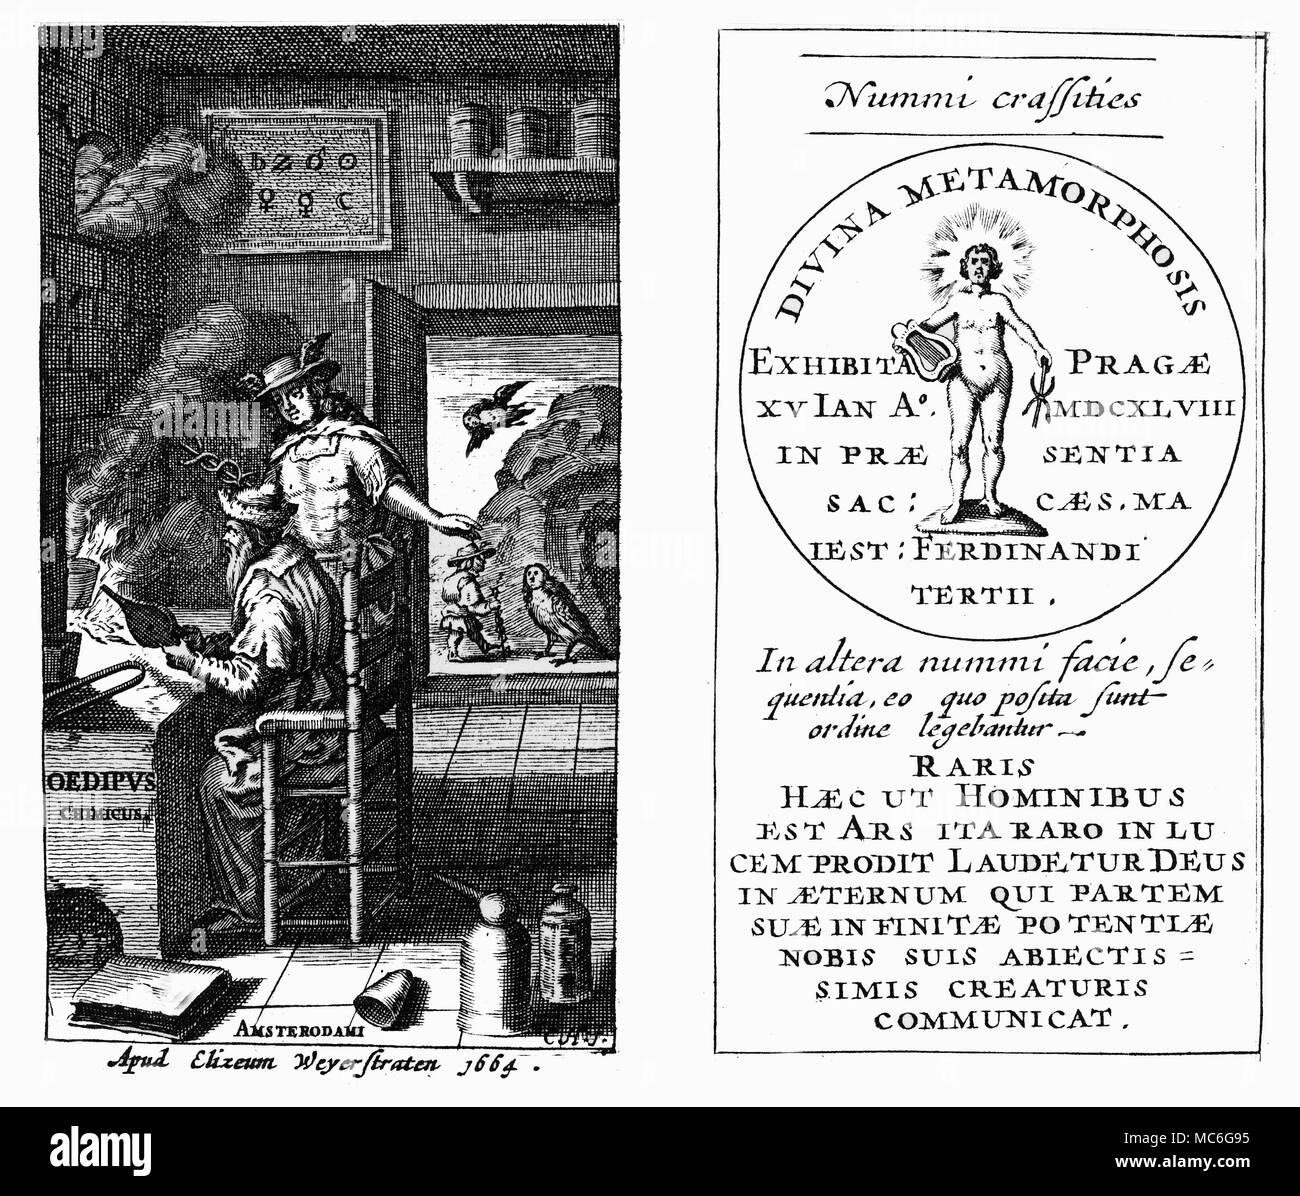 ALCHEMY - GOLD-MAKING - OEDIPUS - SPHINX. [Left] Titlepage of Johann Joachim Becher, Oedipus Chimicus, 1664. The graphic play with the title may be seen in the detail through the open door: Oedipus, with the staff or caduceus of Mercury, is confronted by the human-headed Sphinx. In continuous narrative, above, the Sphinx plunges from the cliff, because Oedipus has been able to answer her question (about the nature of Man). The mythological allusion is, of course, to Becher and Mercury, in the foreground: the alchemist is working with Mercury to answer the riddle of the Universe. [Right] Stock Photo